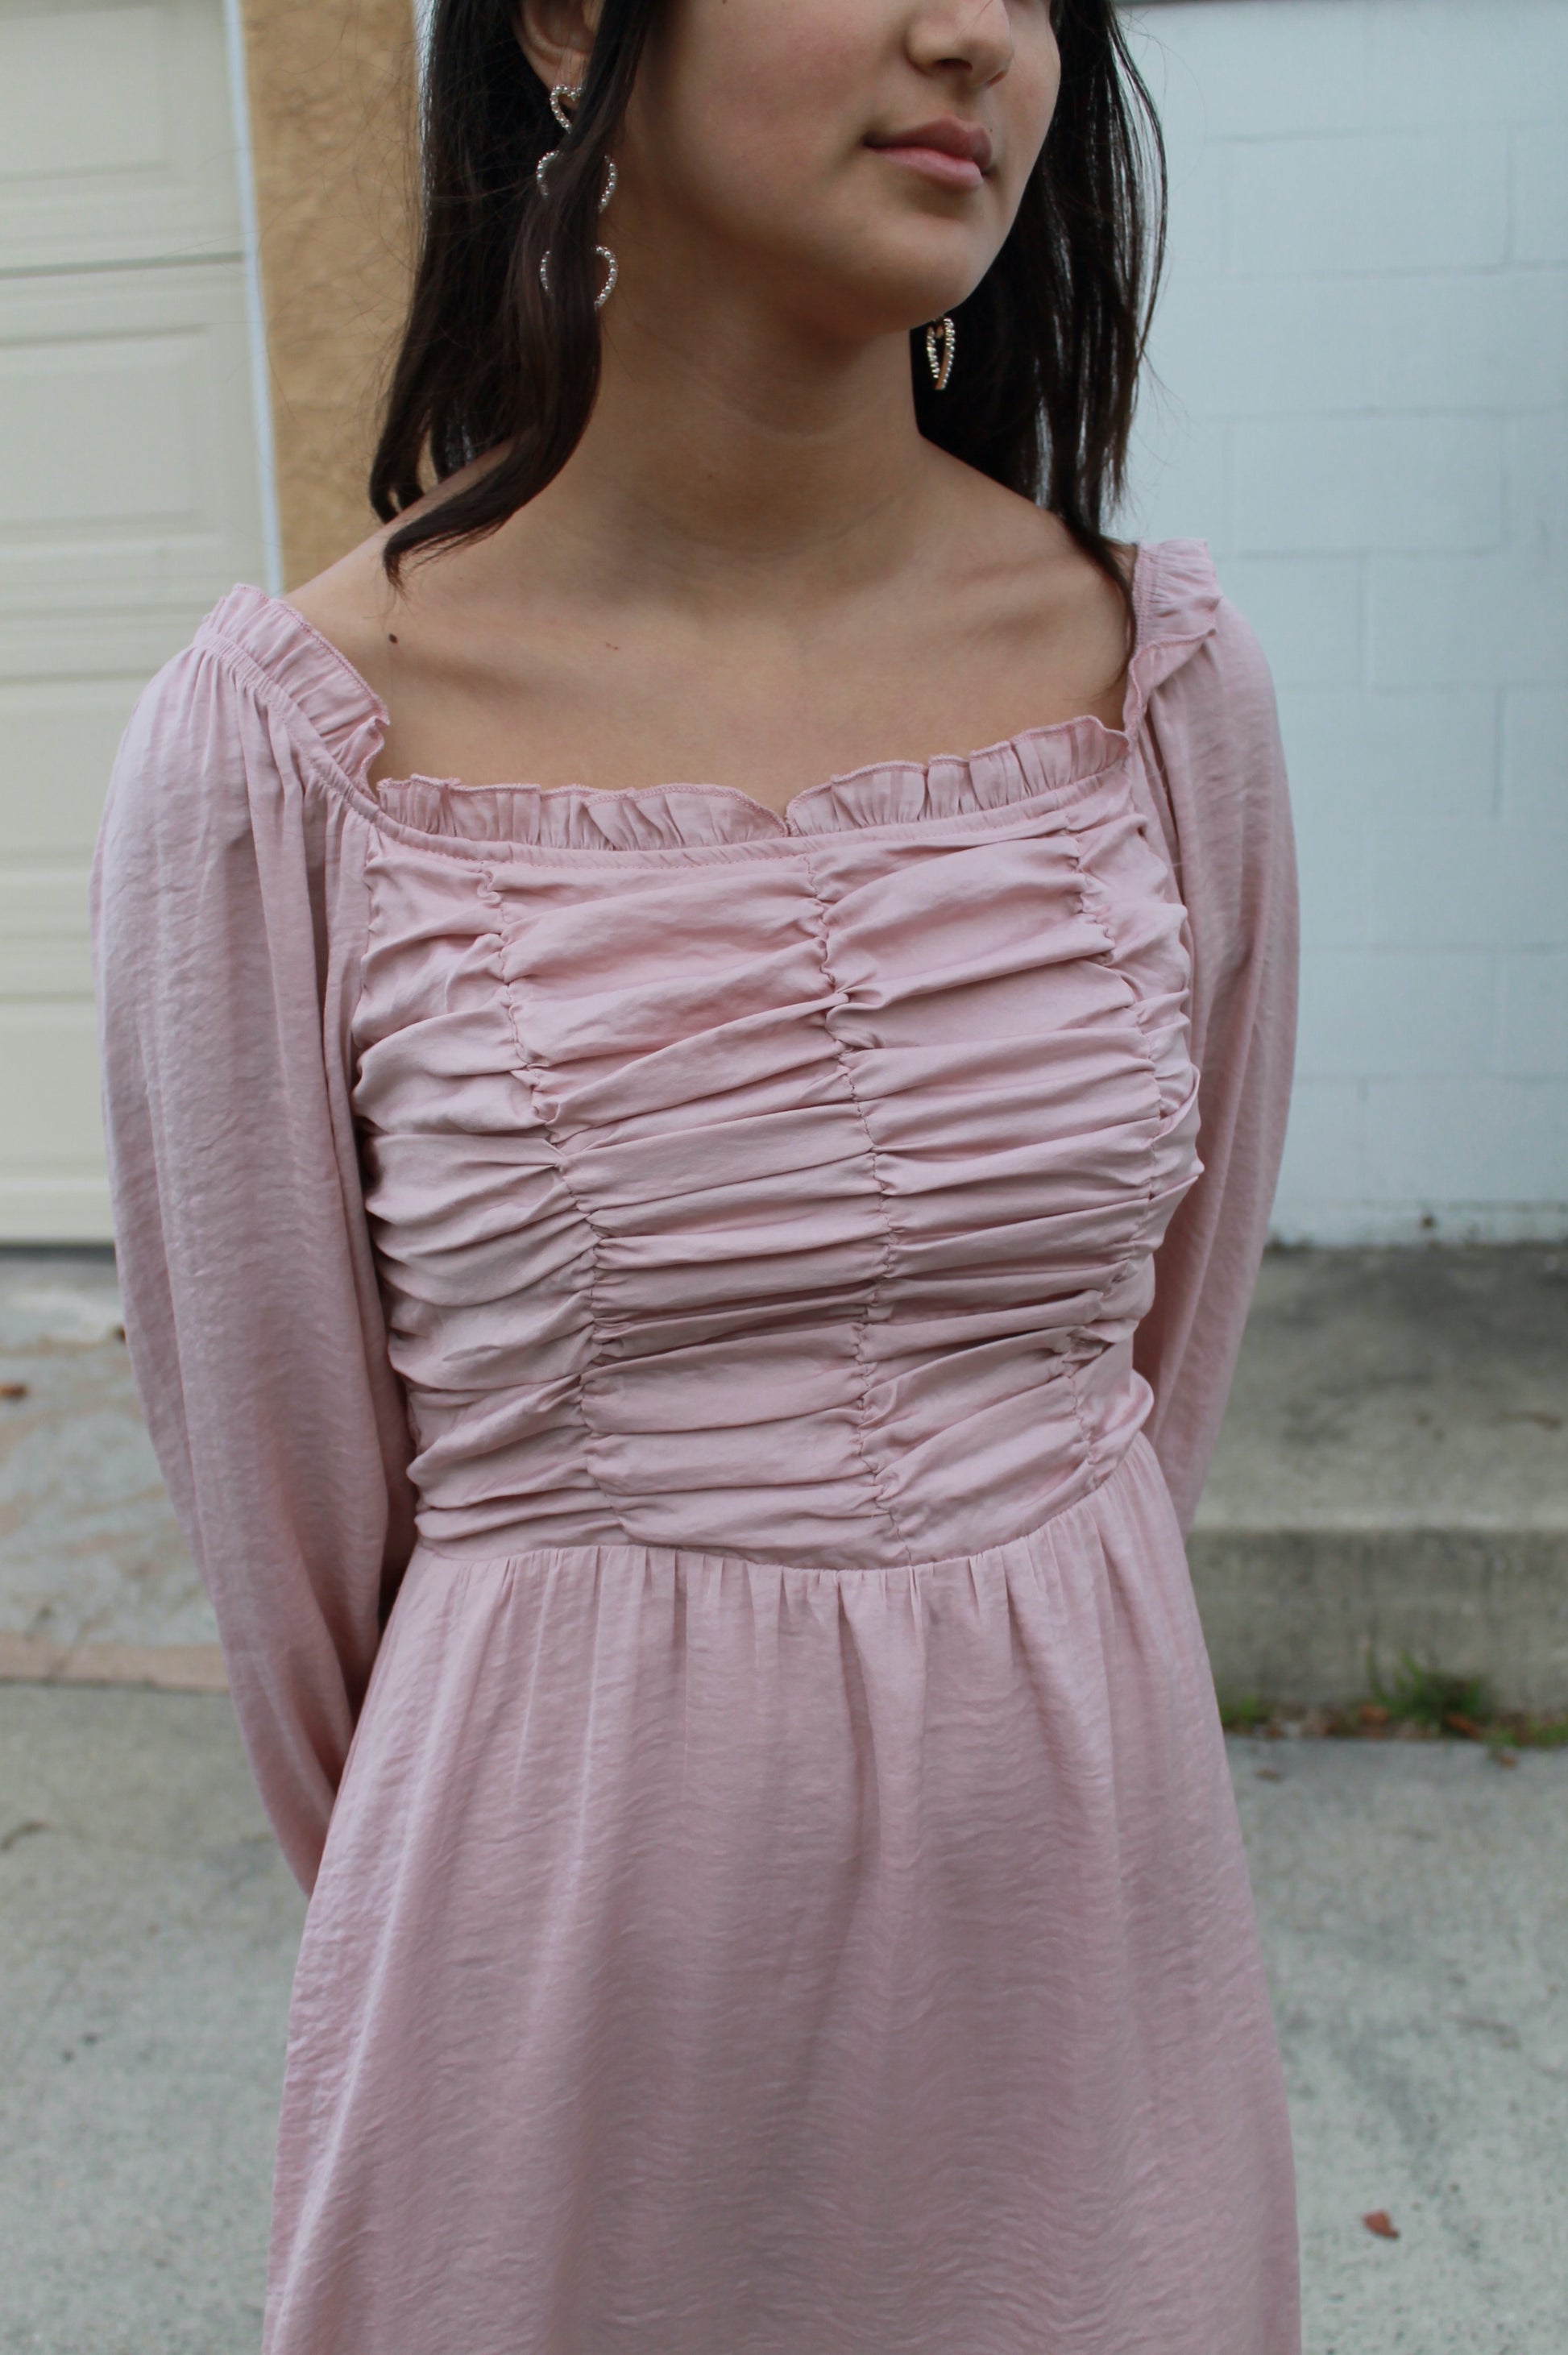 Blush pink ruffled top dress with long sleeves and pockets, knee length.